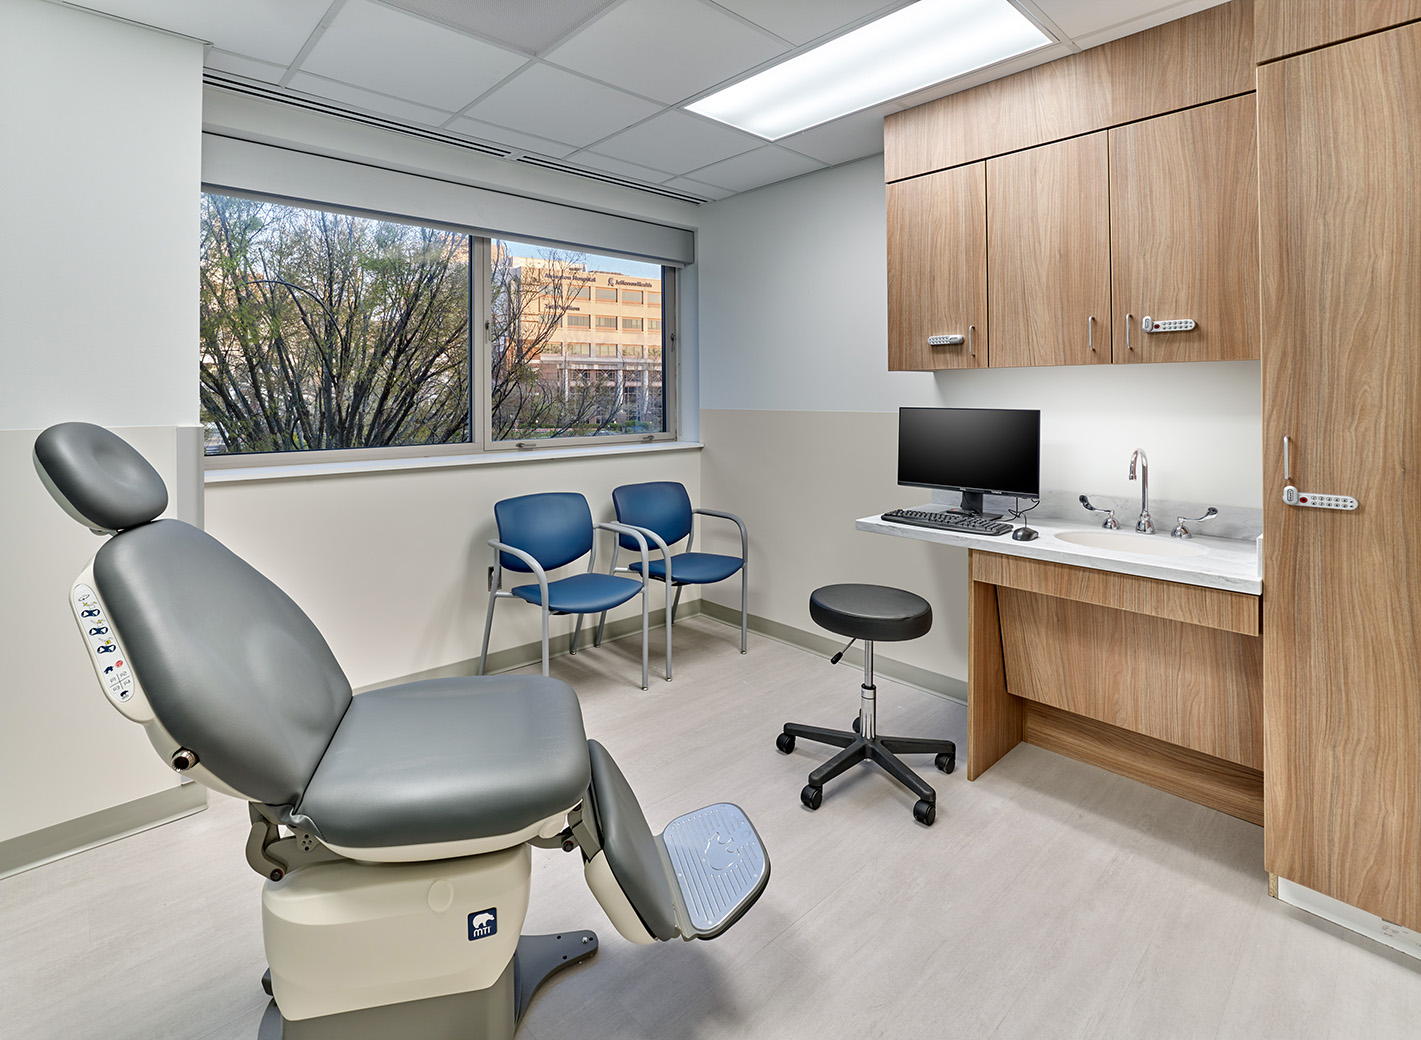 An exam room at ENT and Oral Surgery Suite at Jefferson Health featuring a gray oral surgery chair in the center of the room and a computer screen and wood cabinets